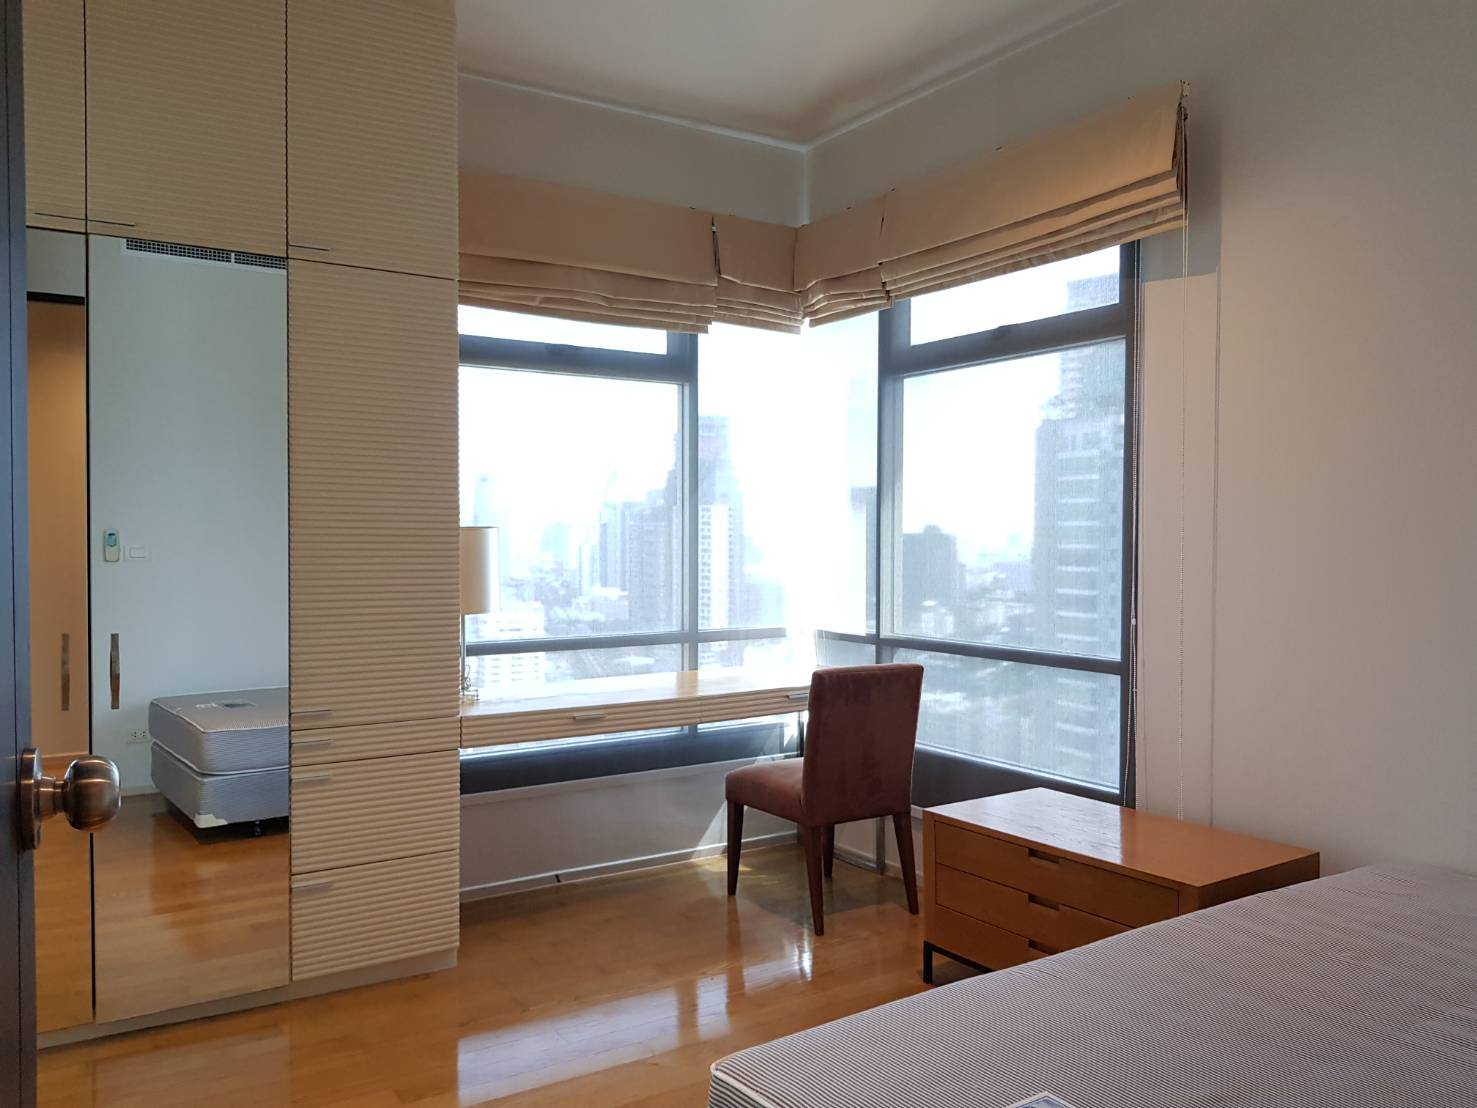 Bangkok Property Condo Apartment House Real Estate For Rent in Phrom Phong Sukhumvit Smooth & Clean Style